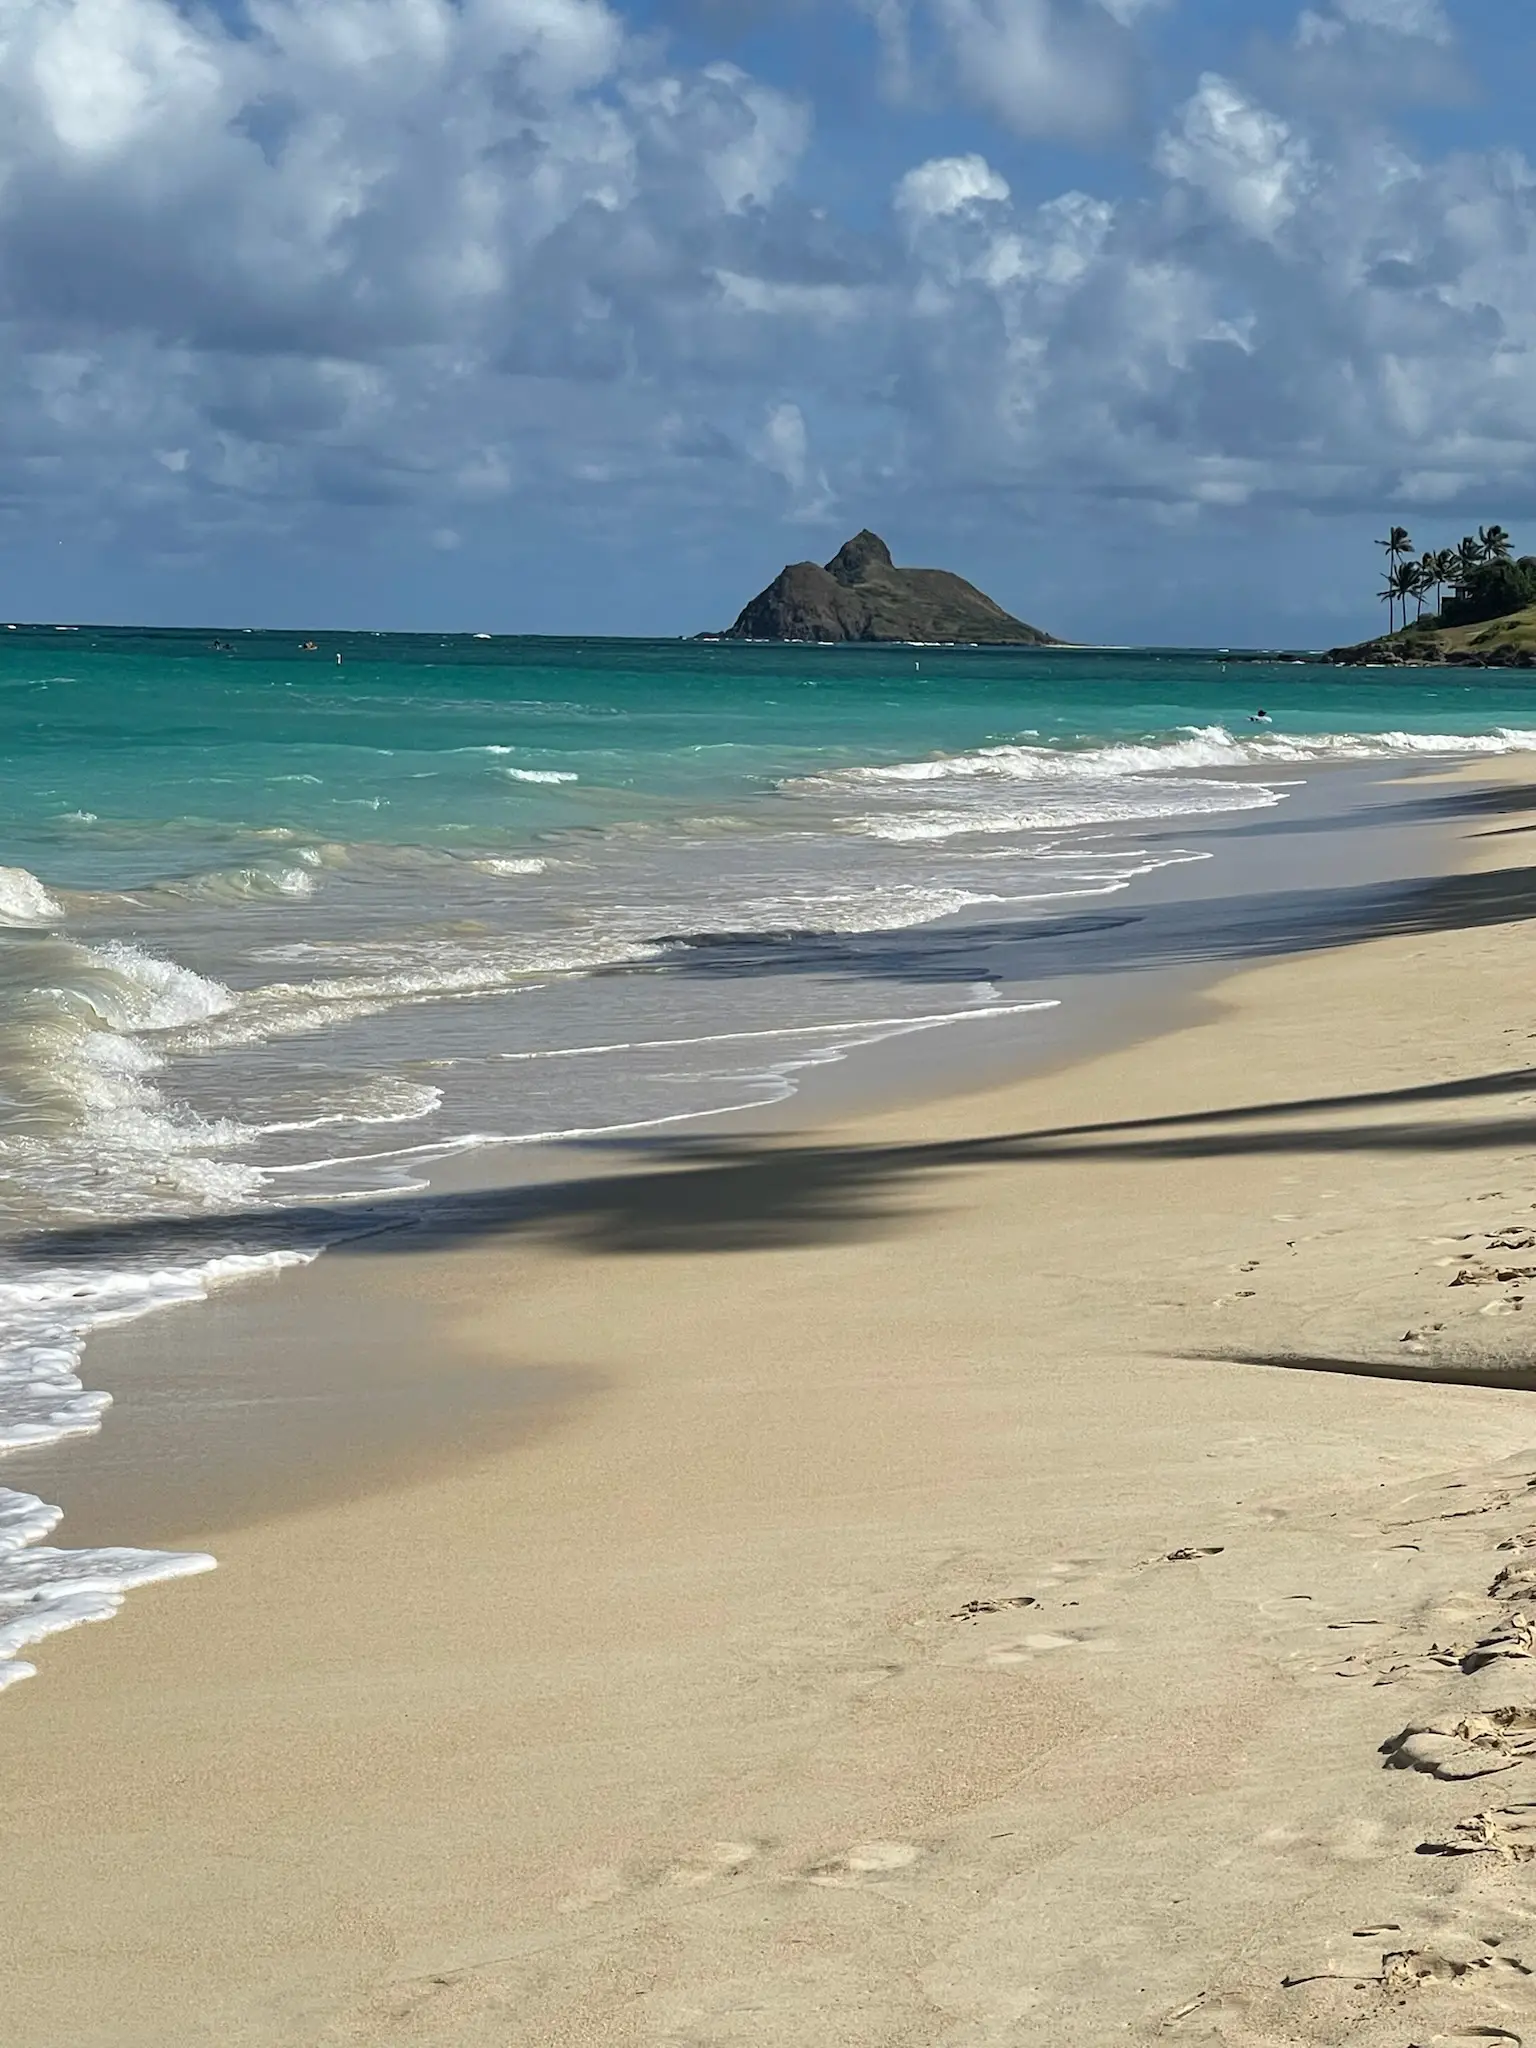 Photograph of Oahu beach with "Chinaman's Hat" rock formation